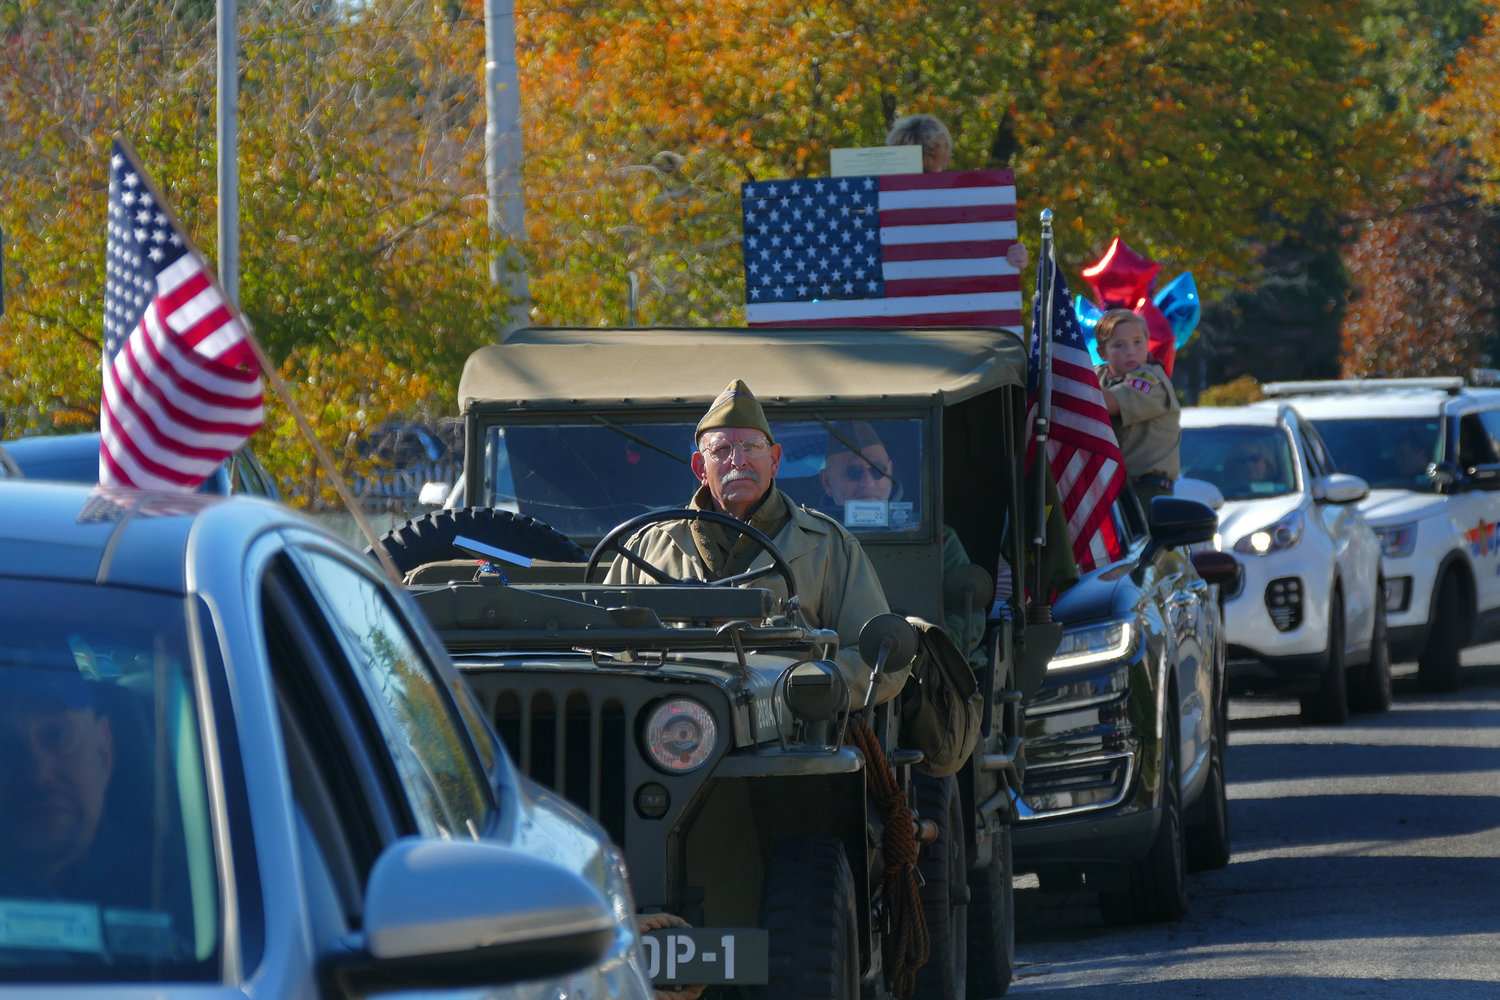 The parade for Rosenberg’s 100th birthday included two World War II-era American vehicles.